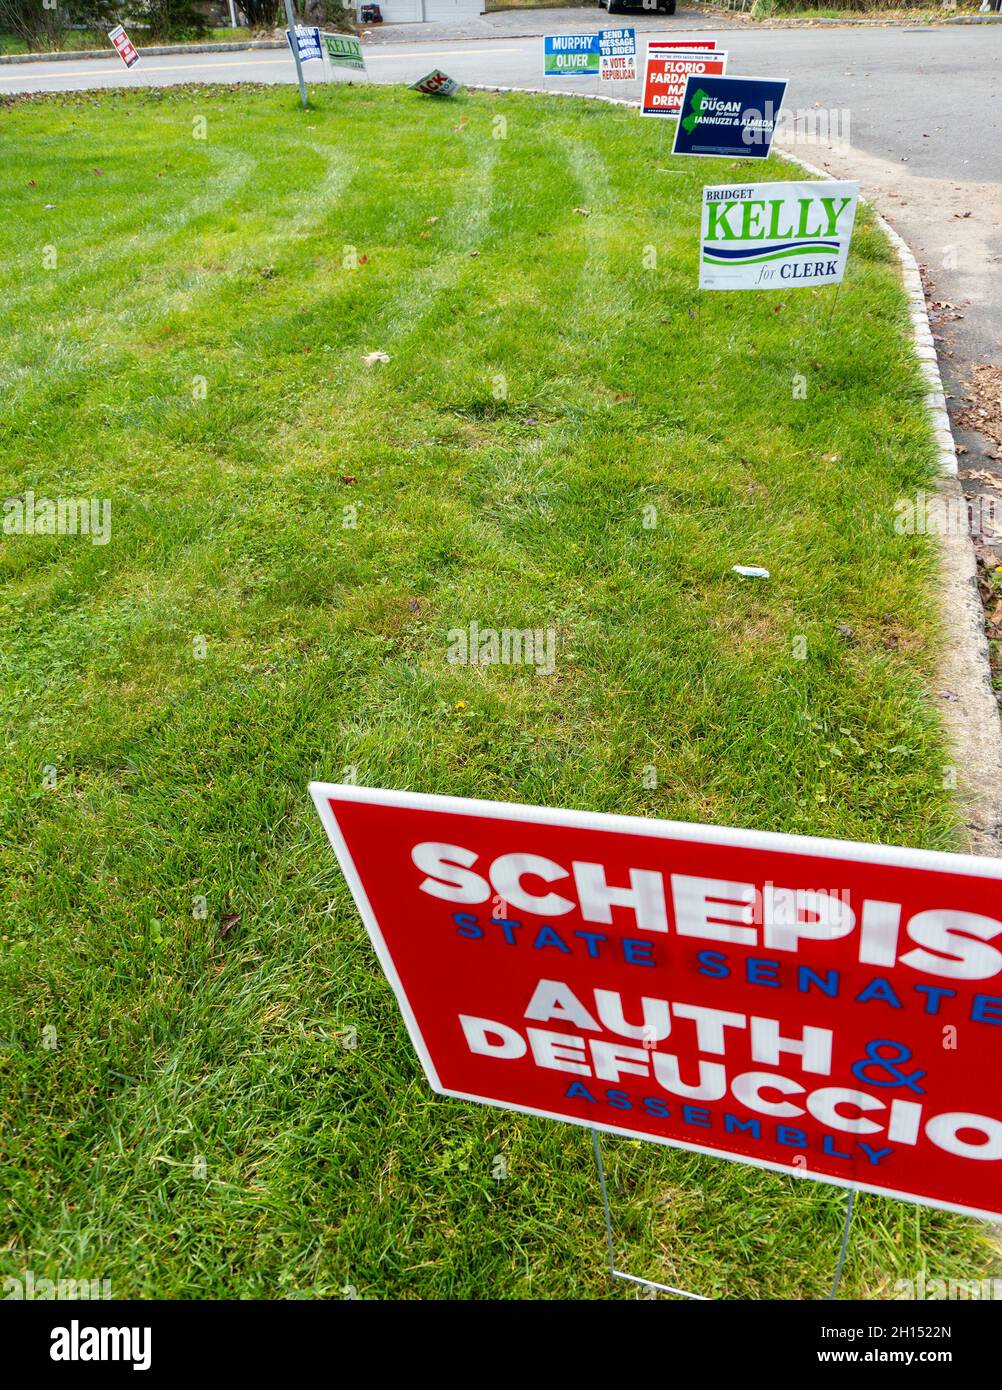 Political candidate signs along a road Stock Photo